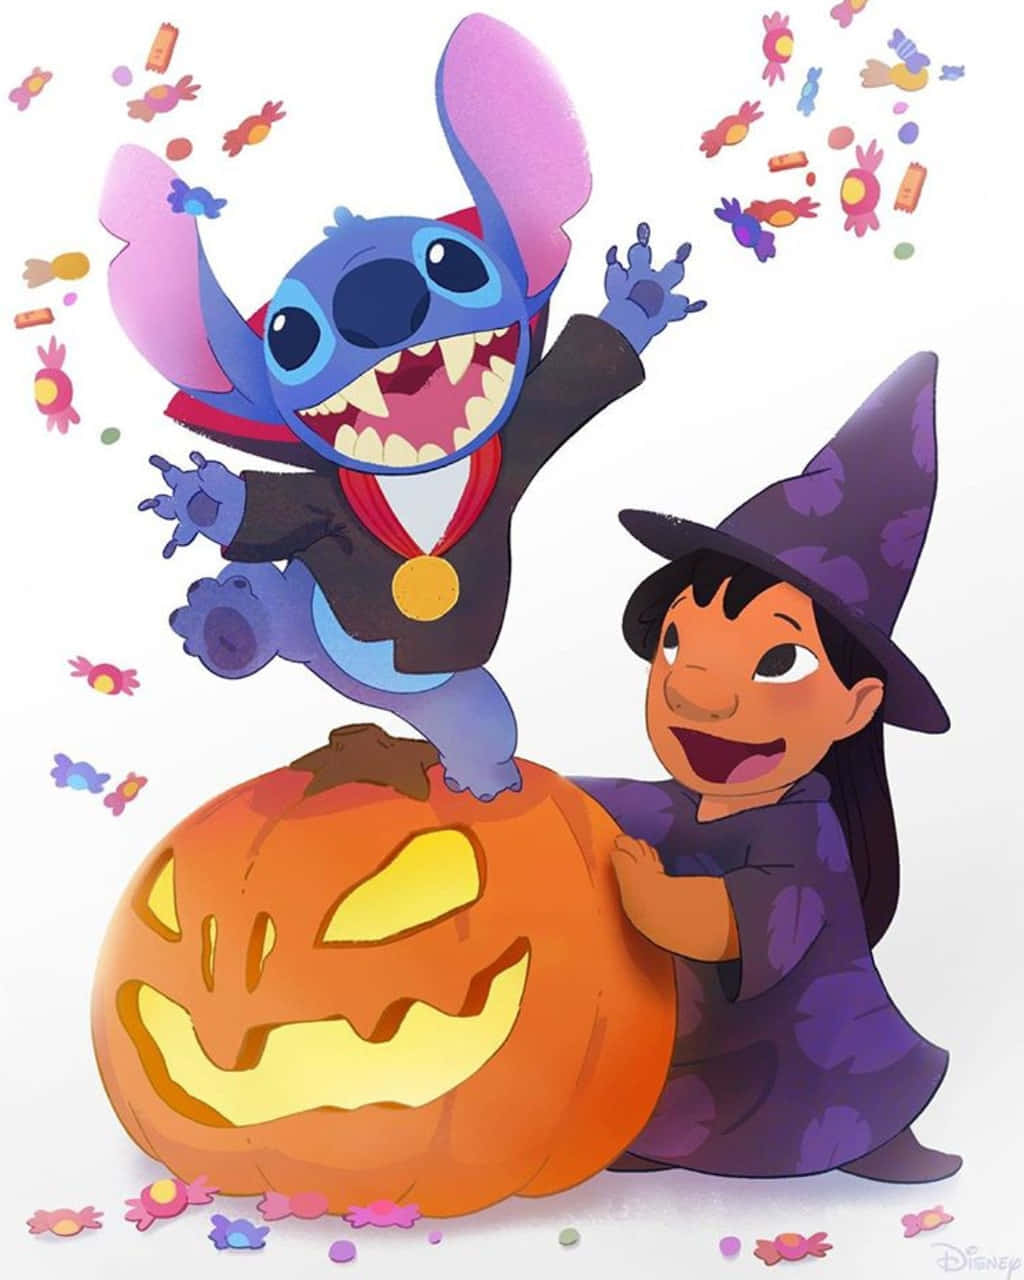 Download Lilo And Stitch Halloween Wallpaper | Wallpapers.com